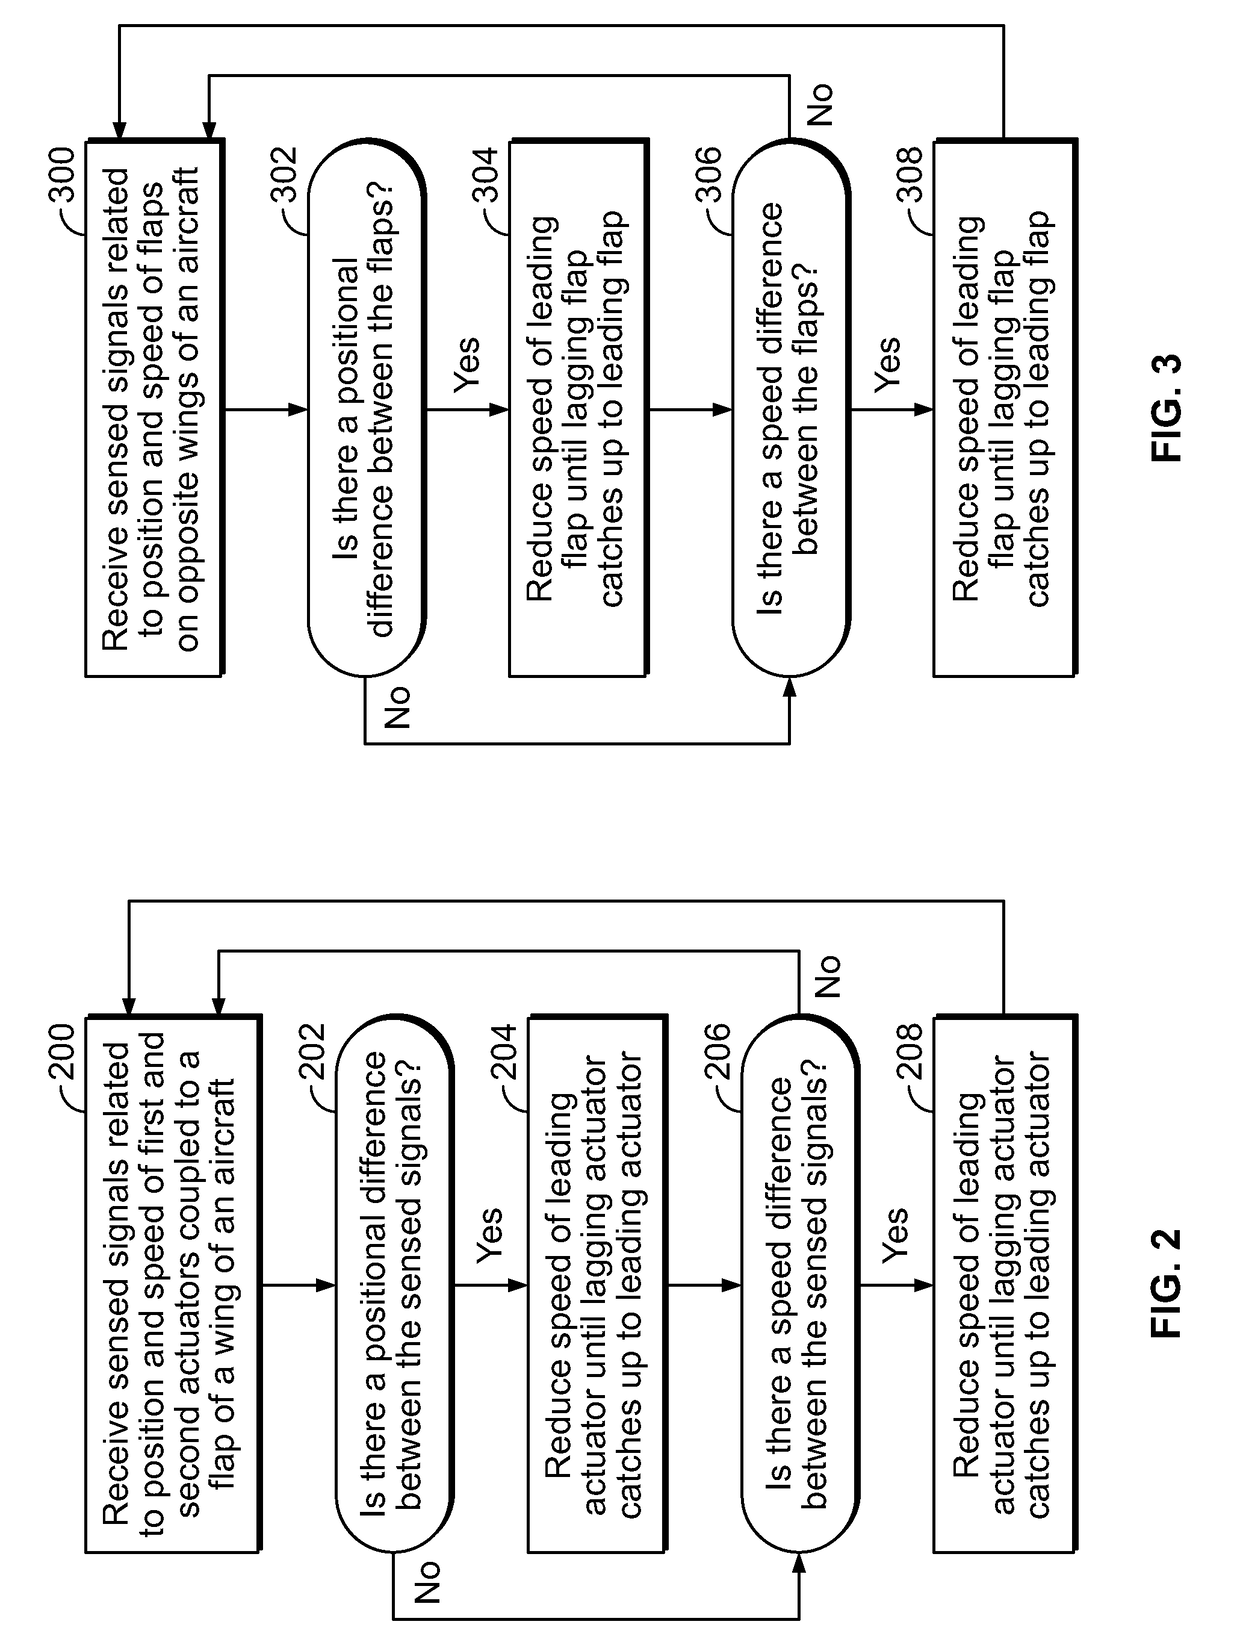 System and method for controlling aircraft wing flap motion